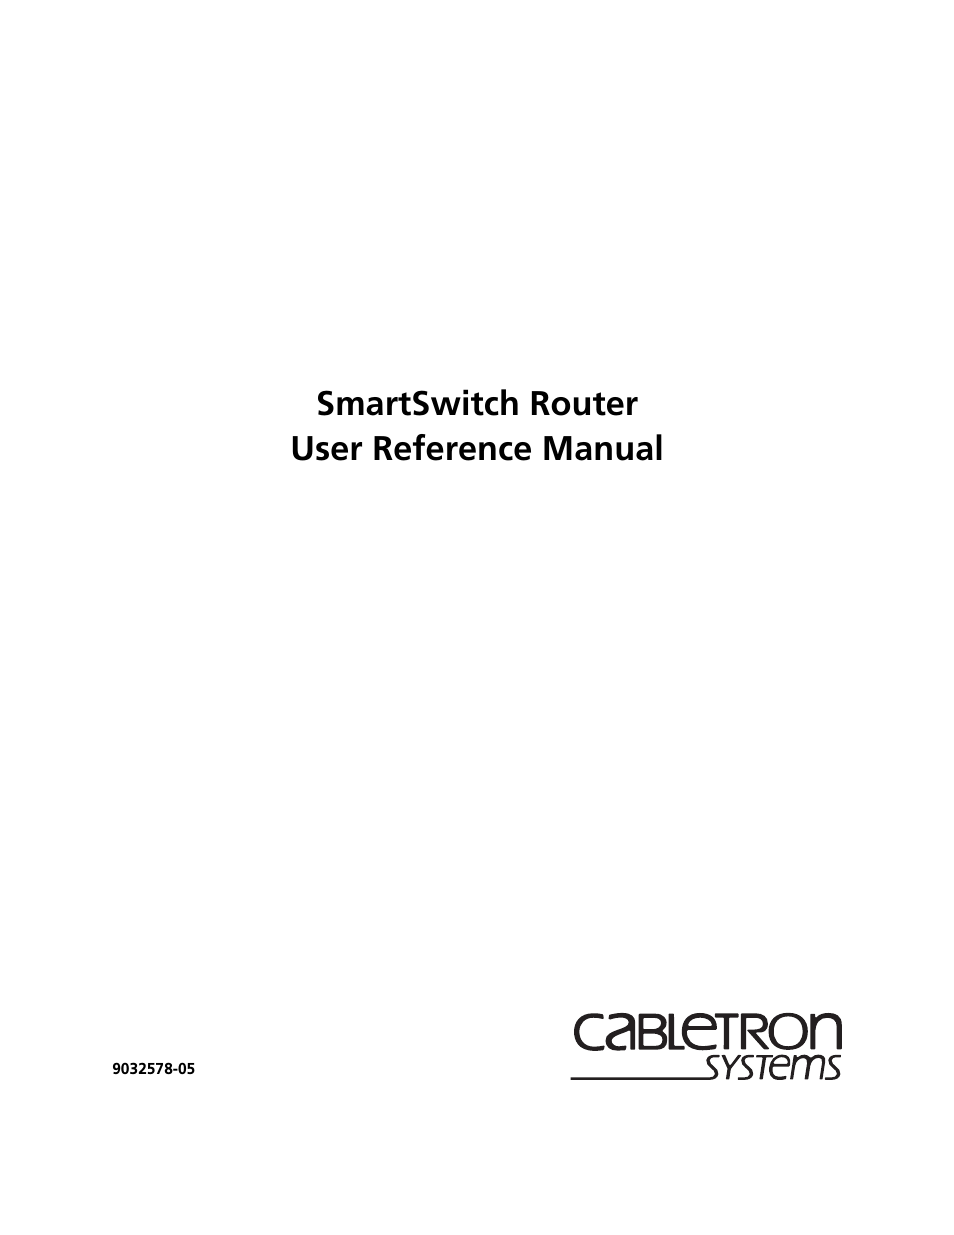 SMARTSWITCH ROUTER 9032578-05